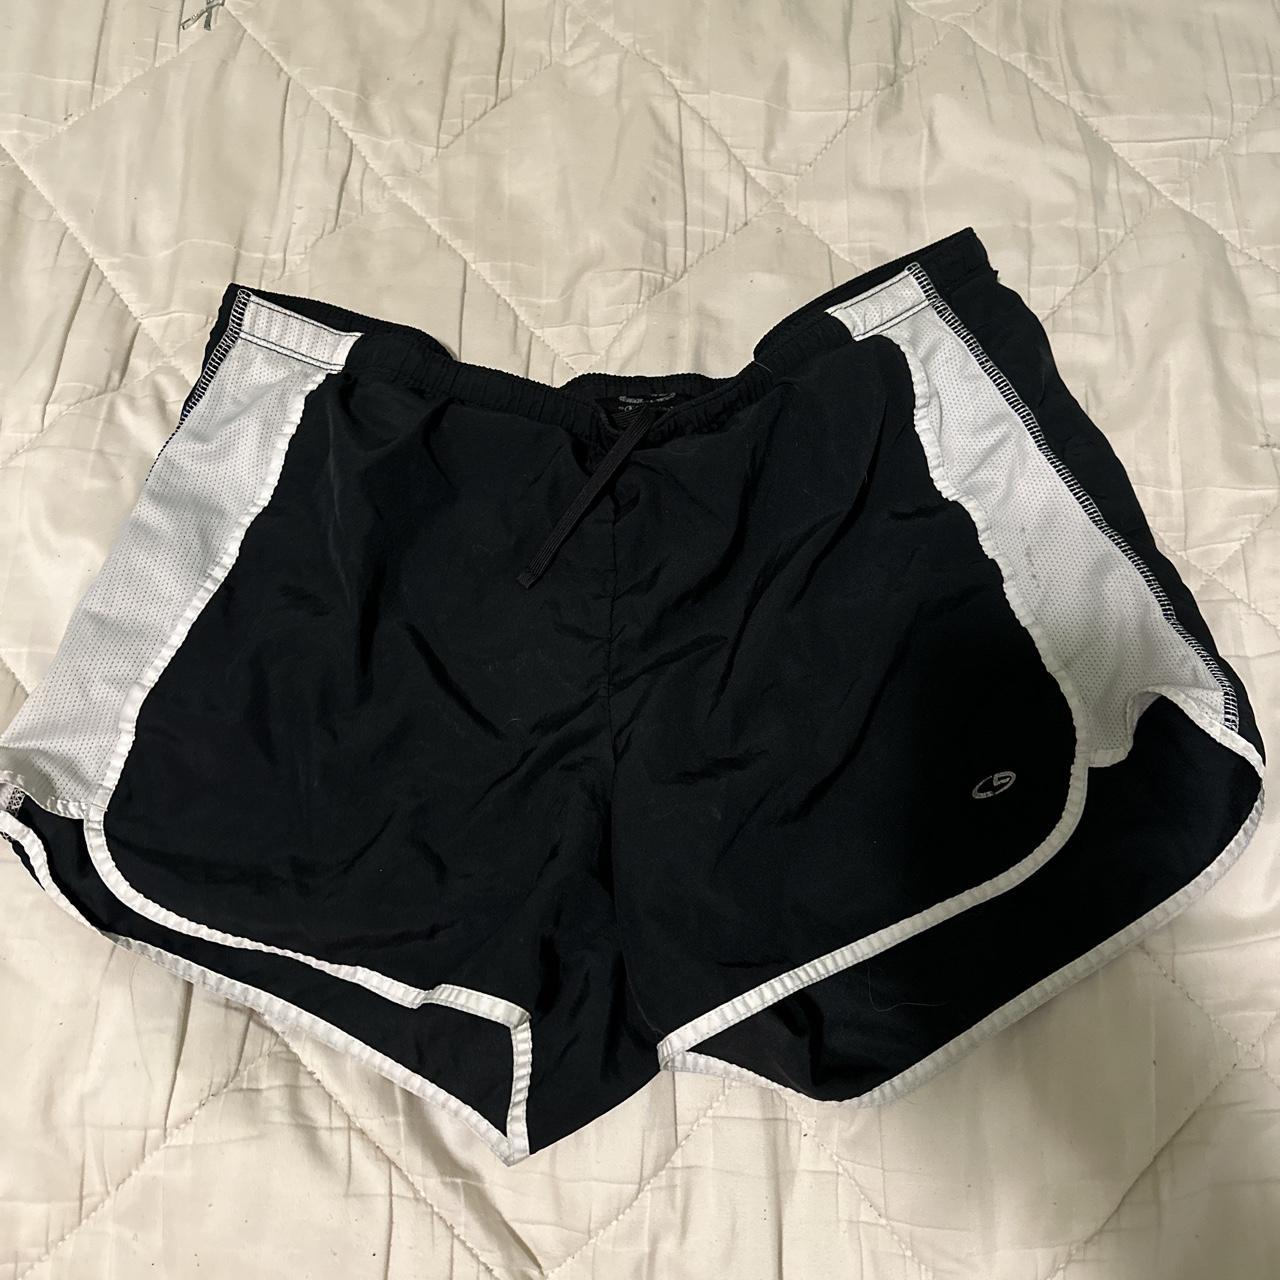 cute and breezy athletic shorts built in underwear - Depop